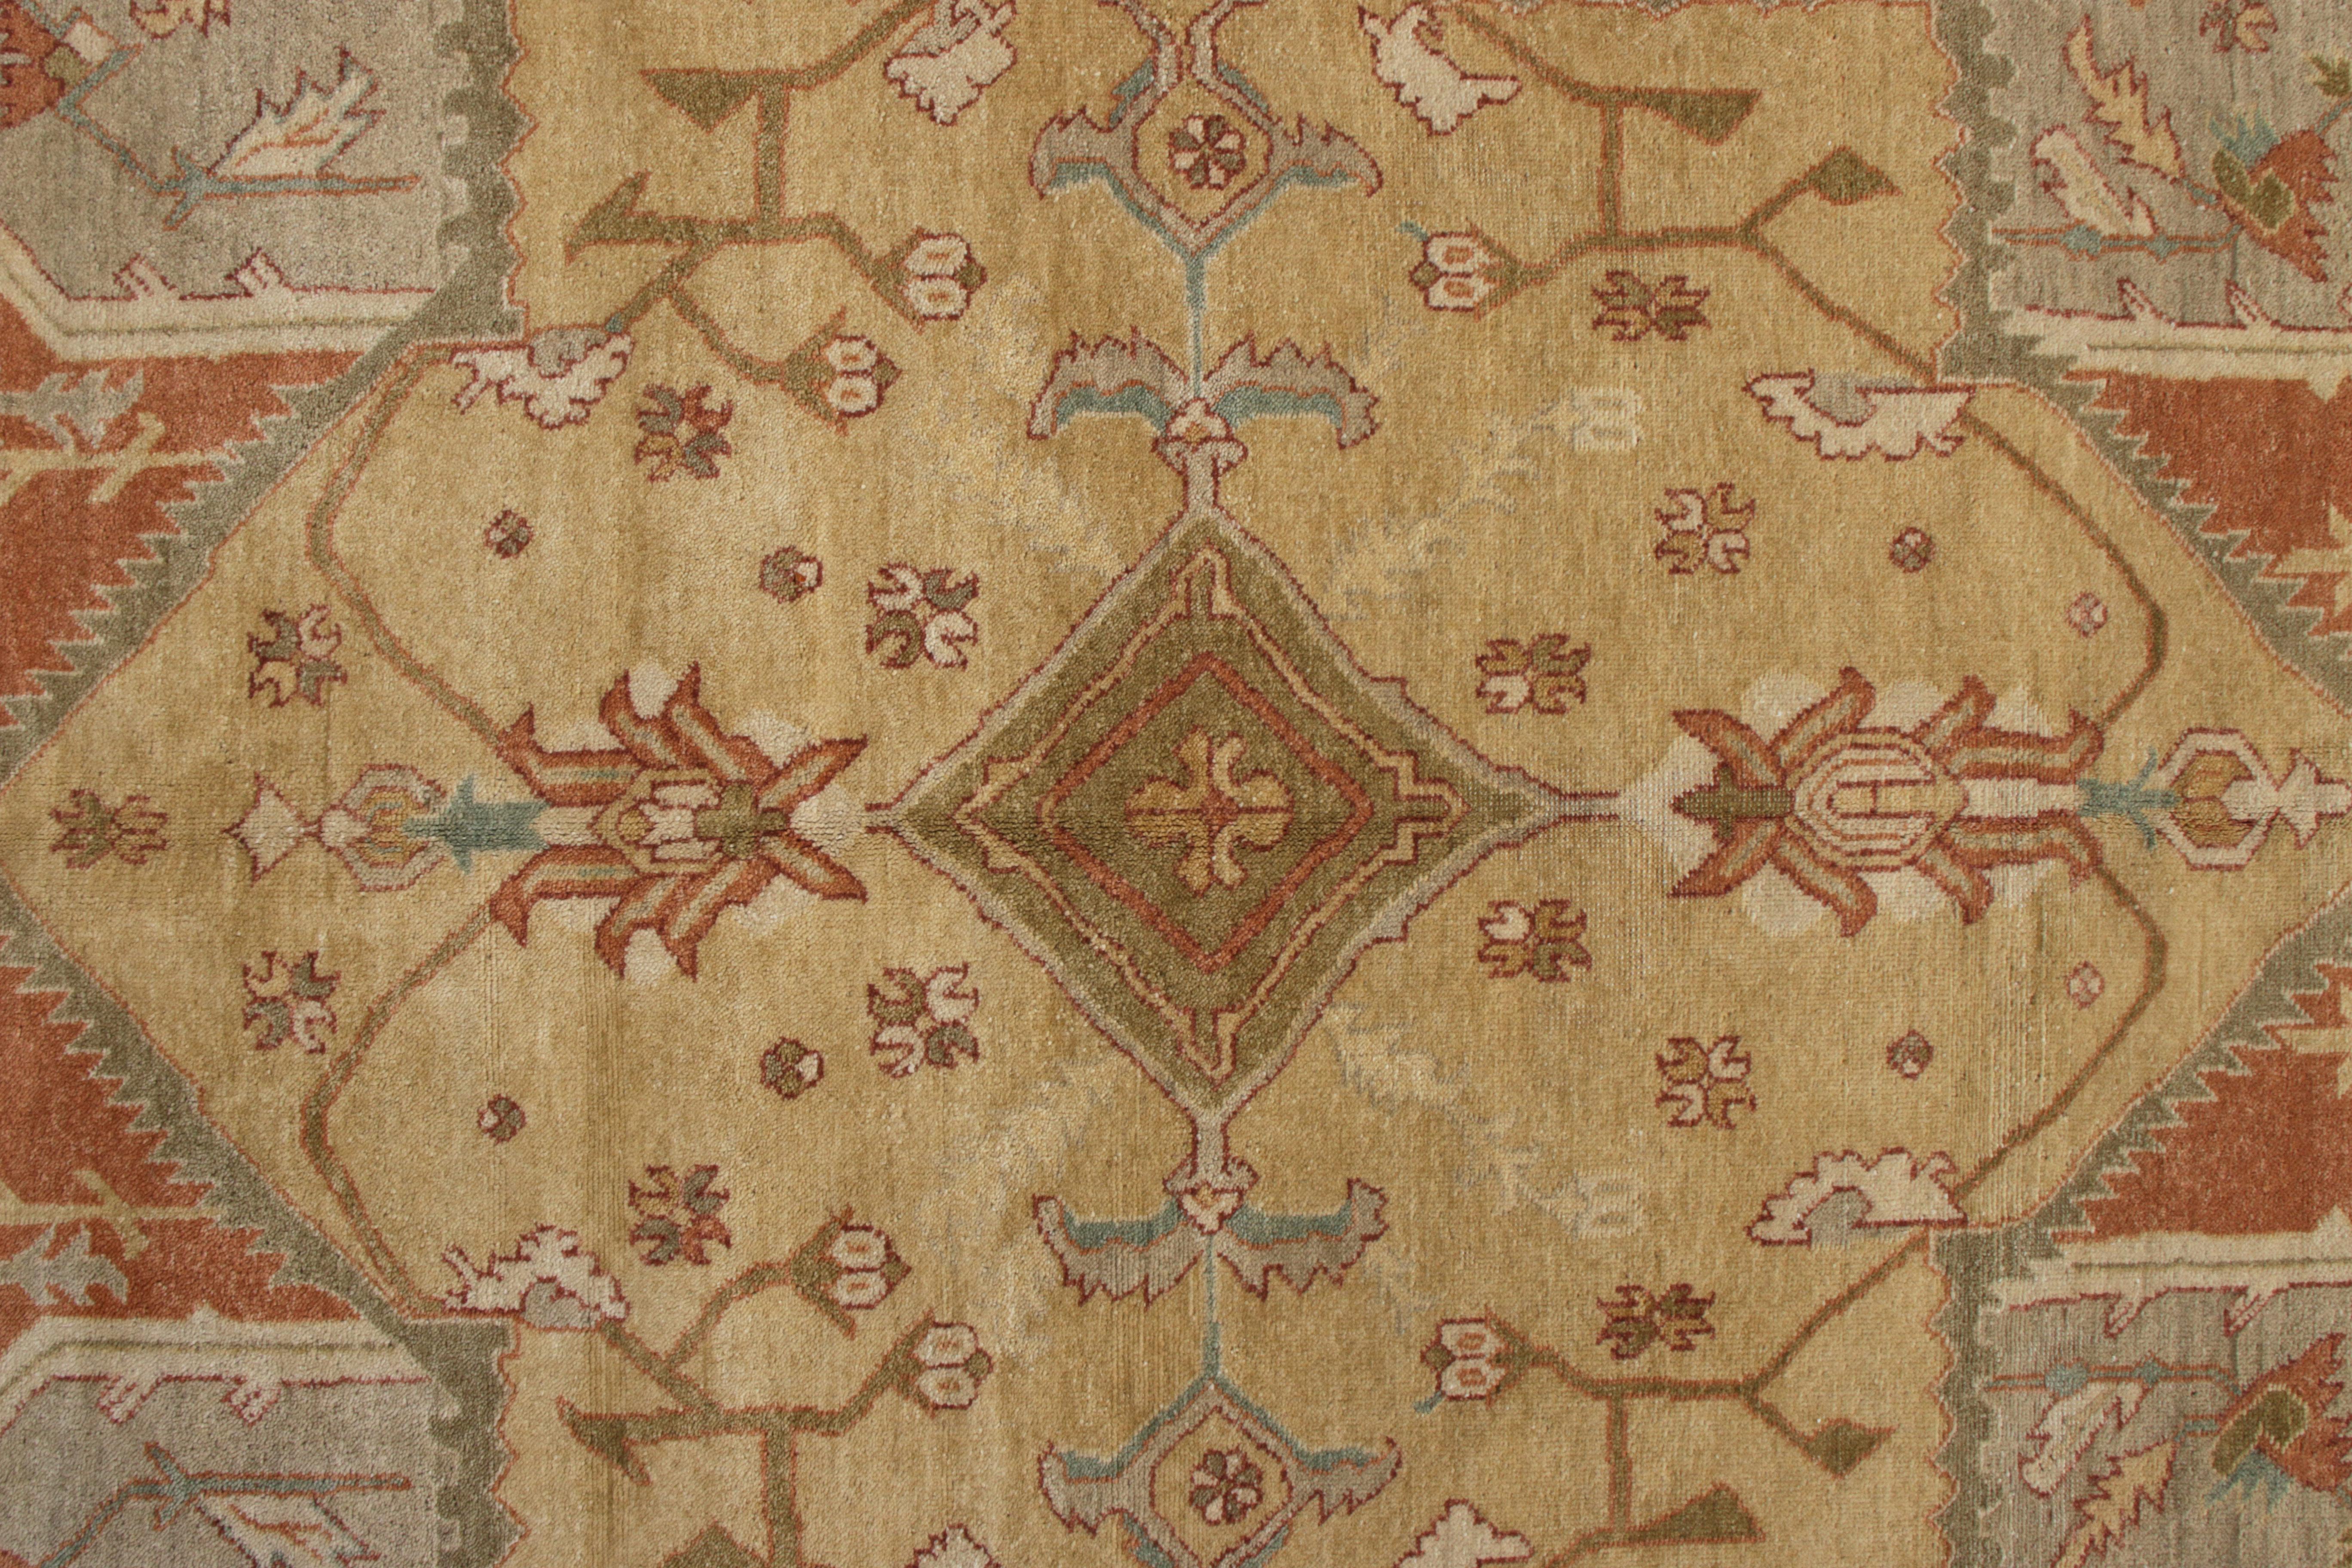 Indian Rug & Kilim’s Polonaise Style Rug in Red and Beige-Brown Medallion Pattern For Sale